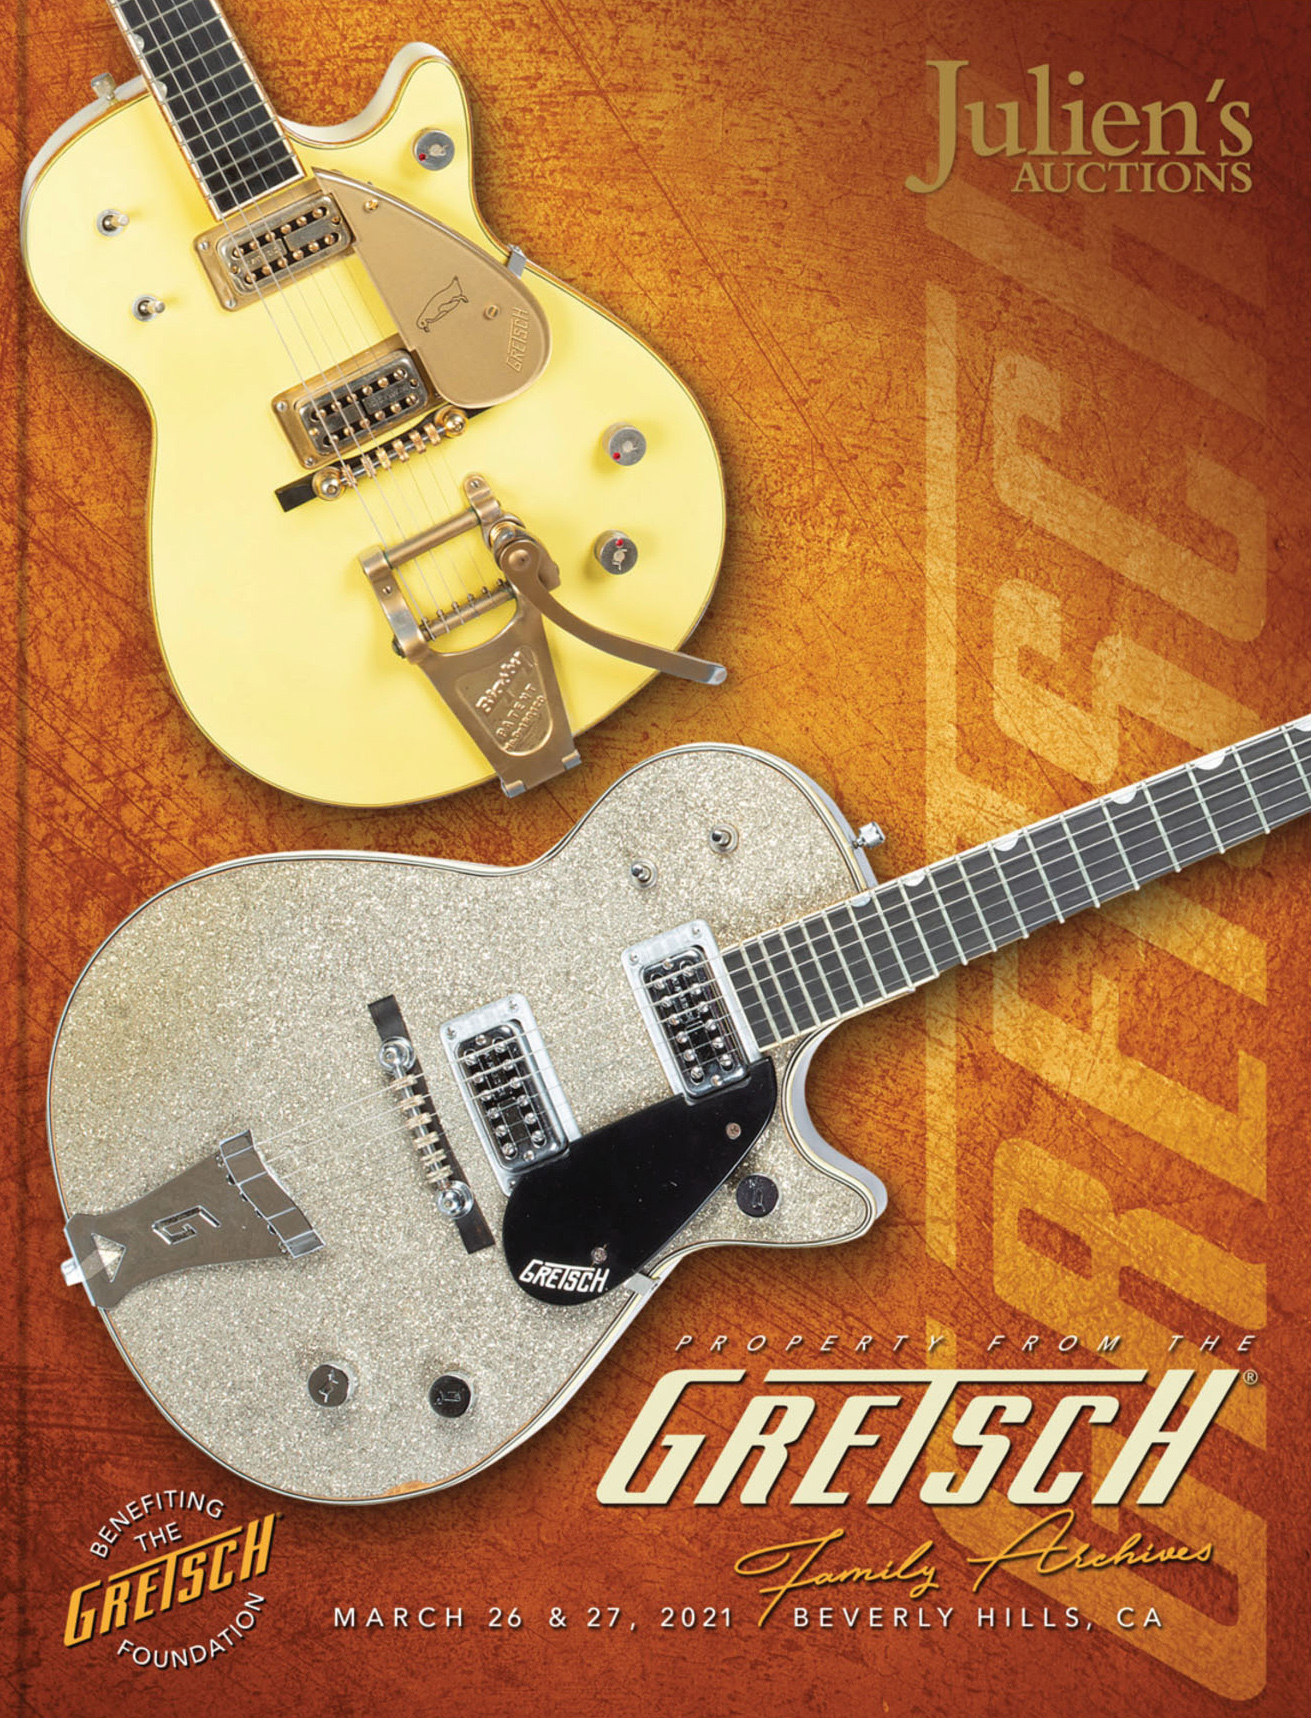 Property From the Gretsch Family Archives Auction Takes Place This 